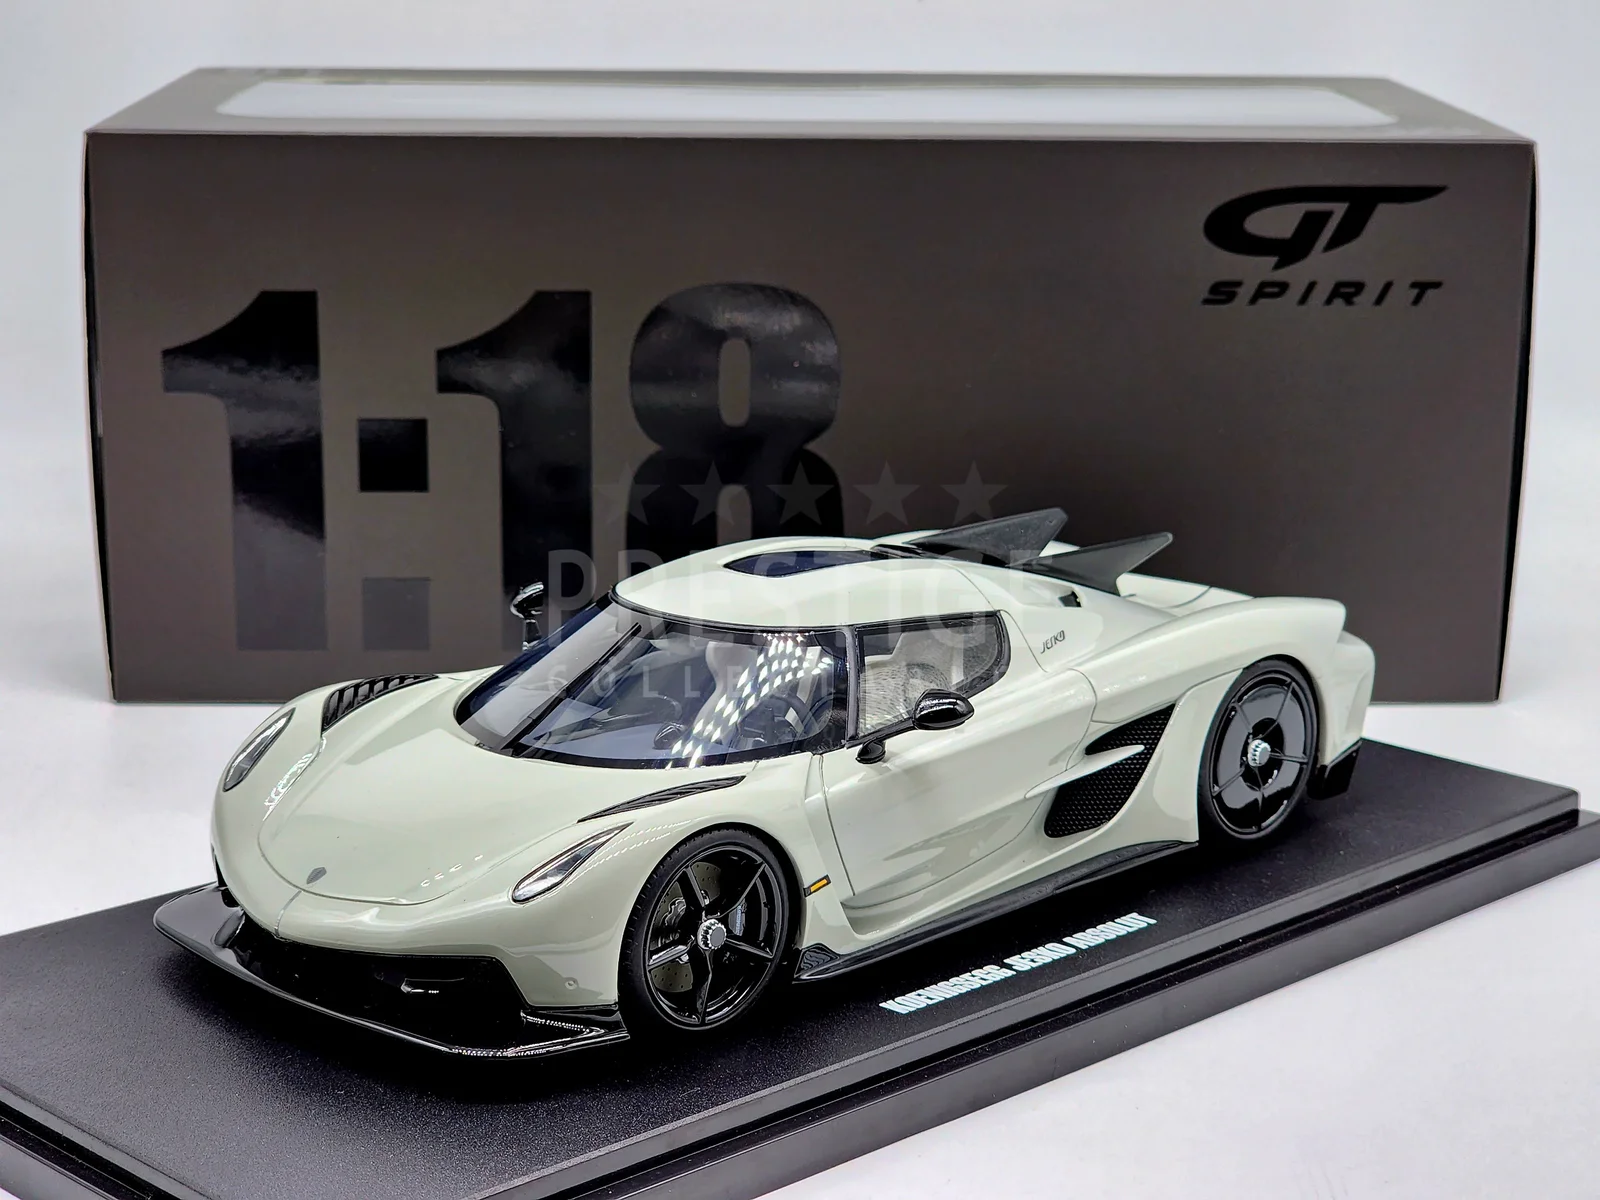 

GT Spirit 2022 Jesko Absolut Flat Grey GT412 1:18 Scale - New Resin Model Car Collection Limited Edition Hobby Toys